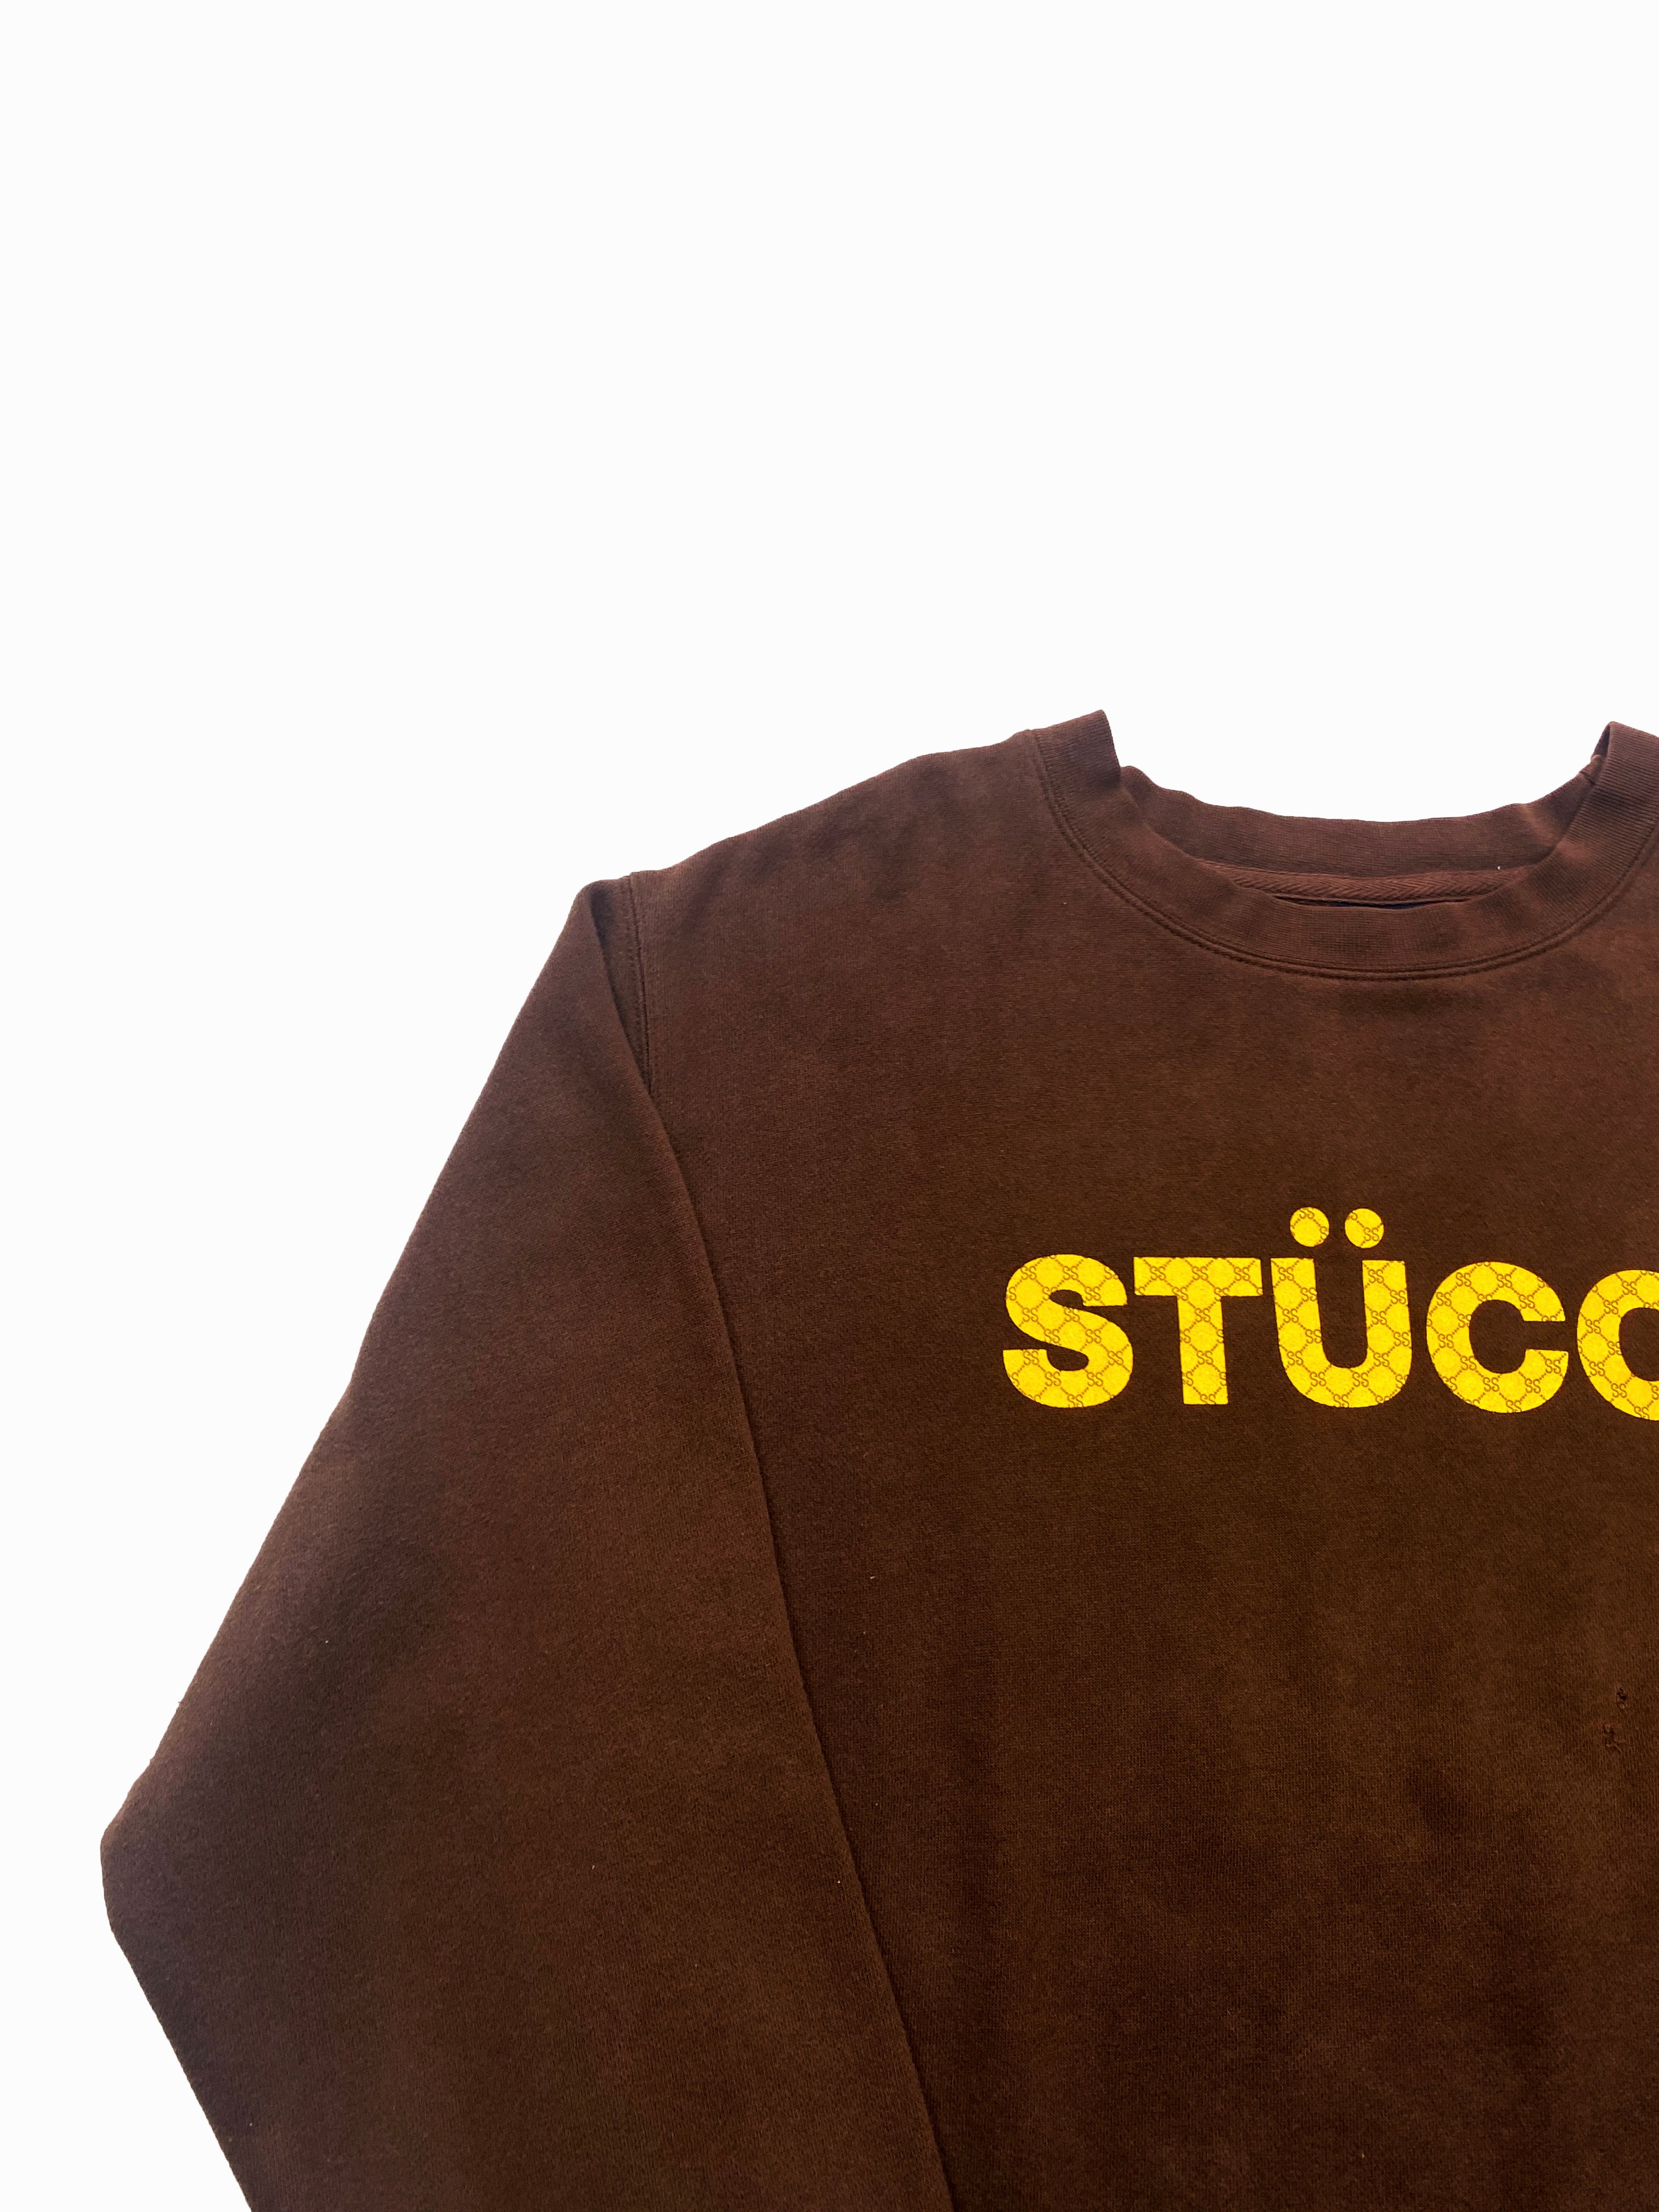 Stussy 'Gucci' Spell Out Brown Jumper 00's